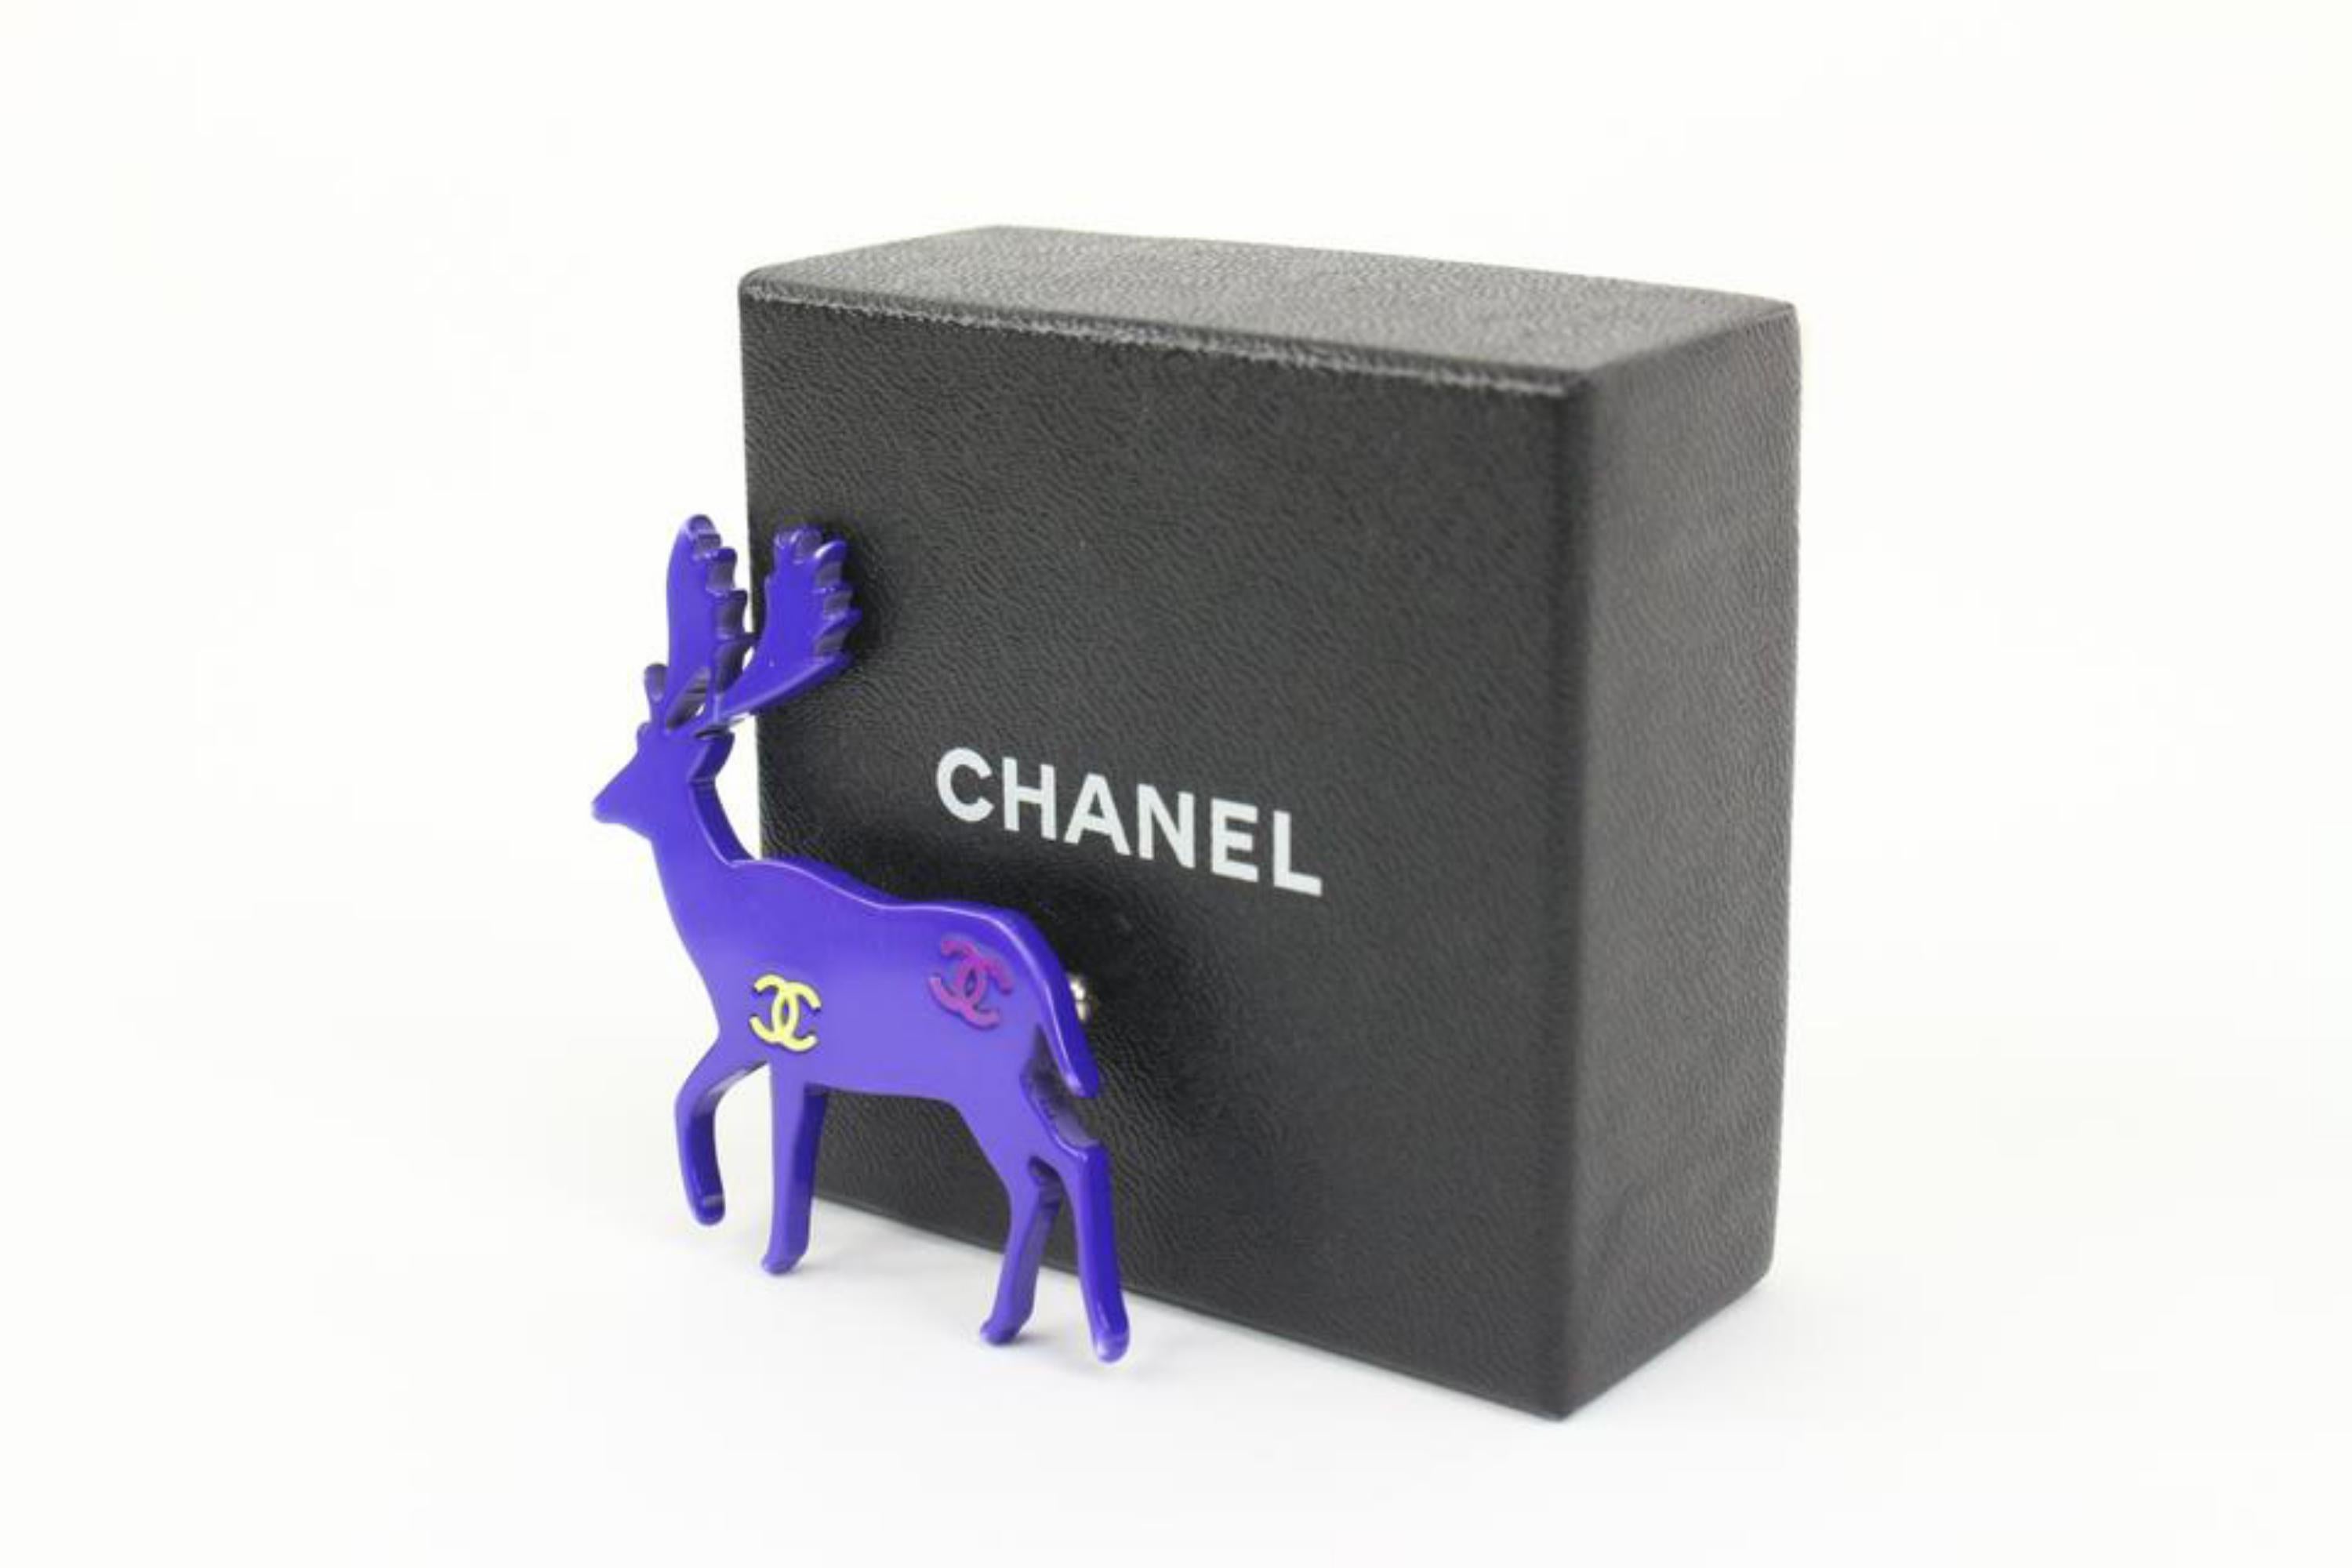 Chanel 01a CC Logos Deer Motif Brooch Pin Corsage Pink 92ck310s
Date Code/Serial Number: 01 A
Made In: France
Measurements: Length:  2